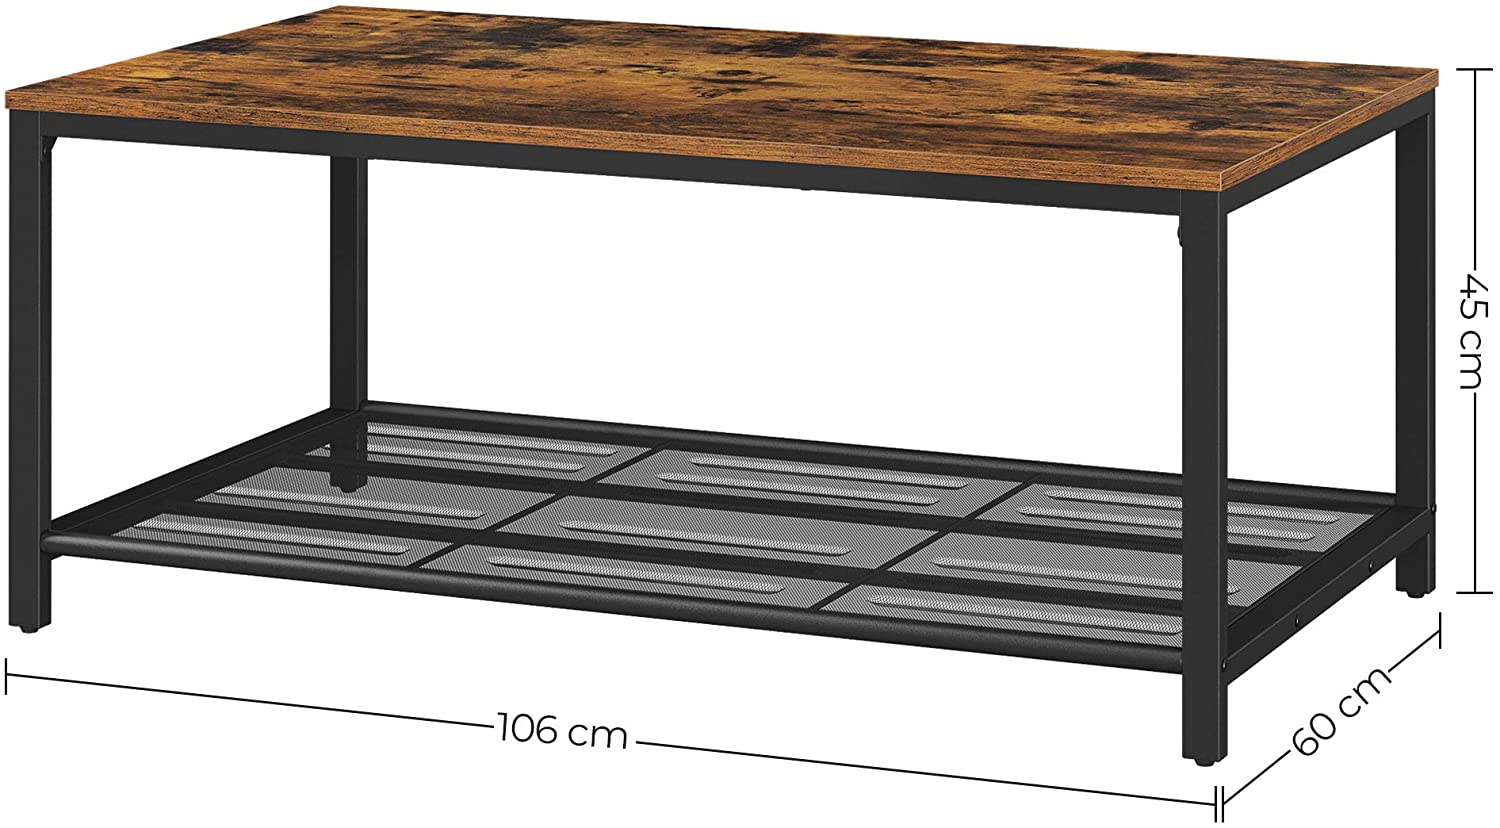 Rena Coffee Table with Storage Shelf Rustic Style